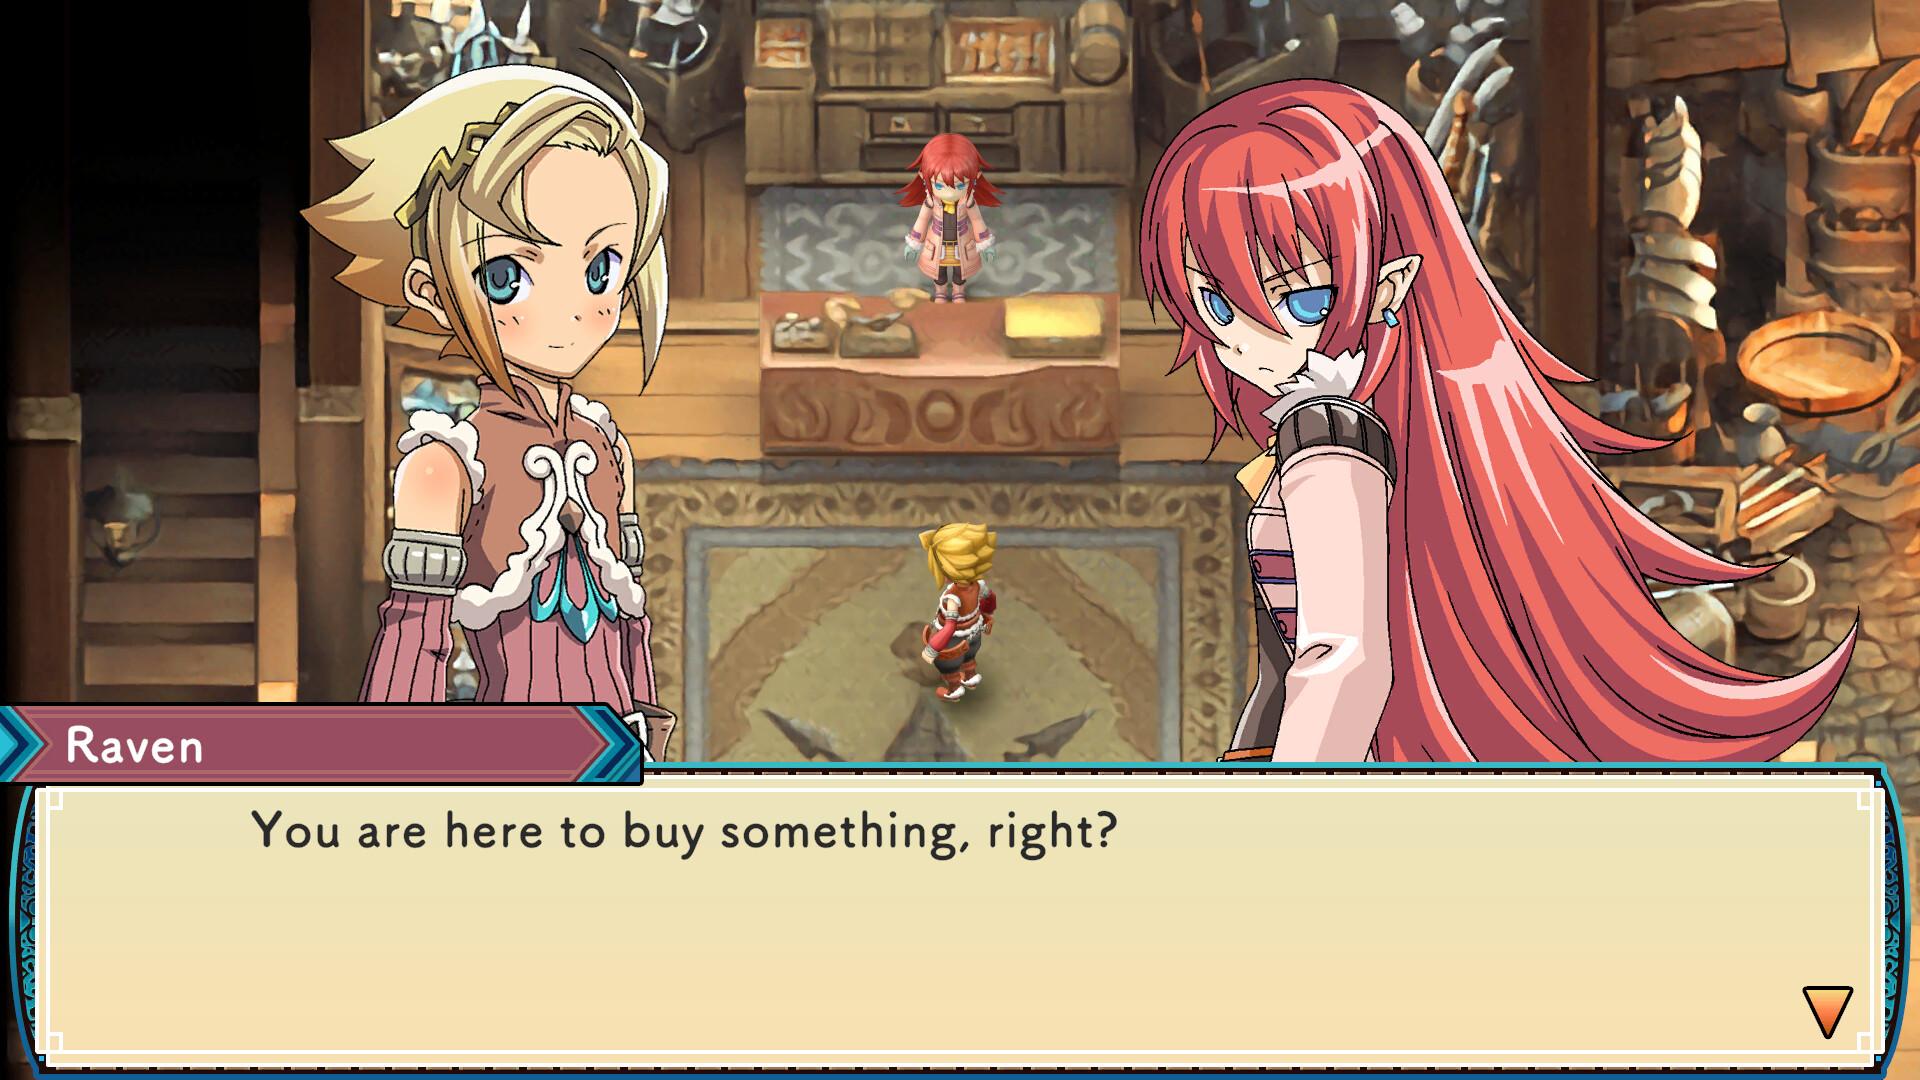 Screenshot №4 from game Rune Factory 3 Special